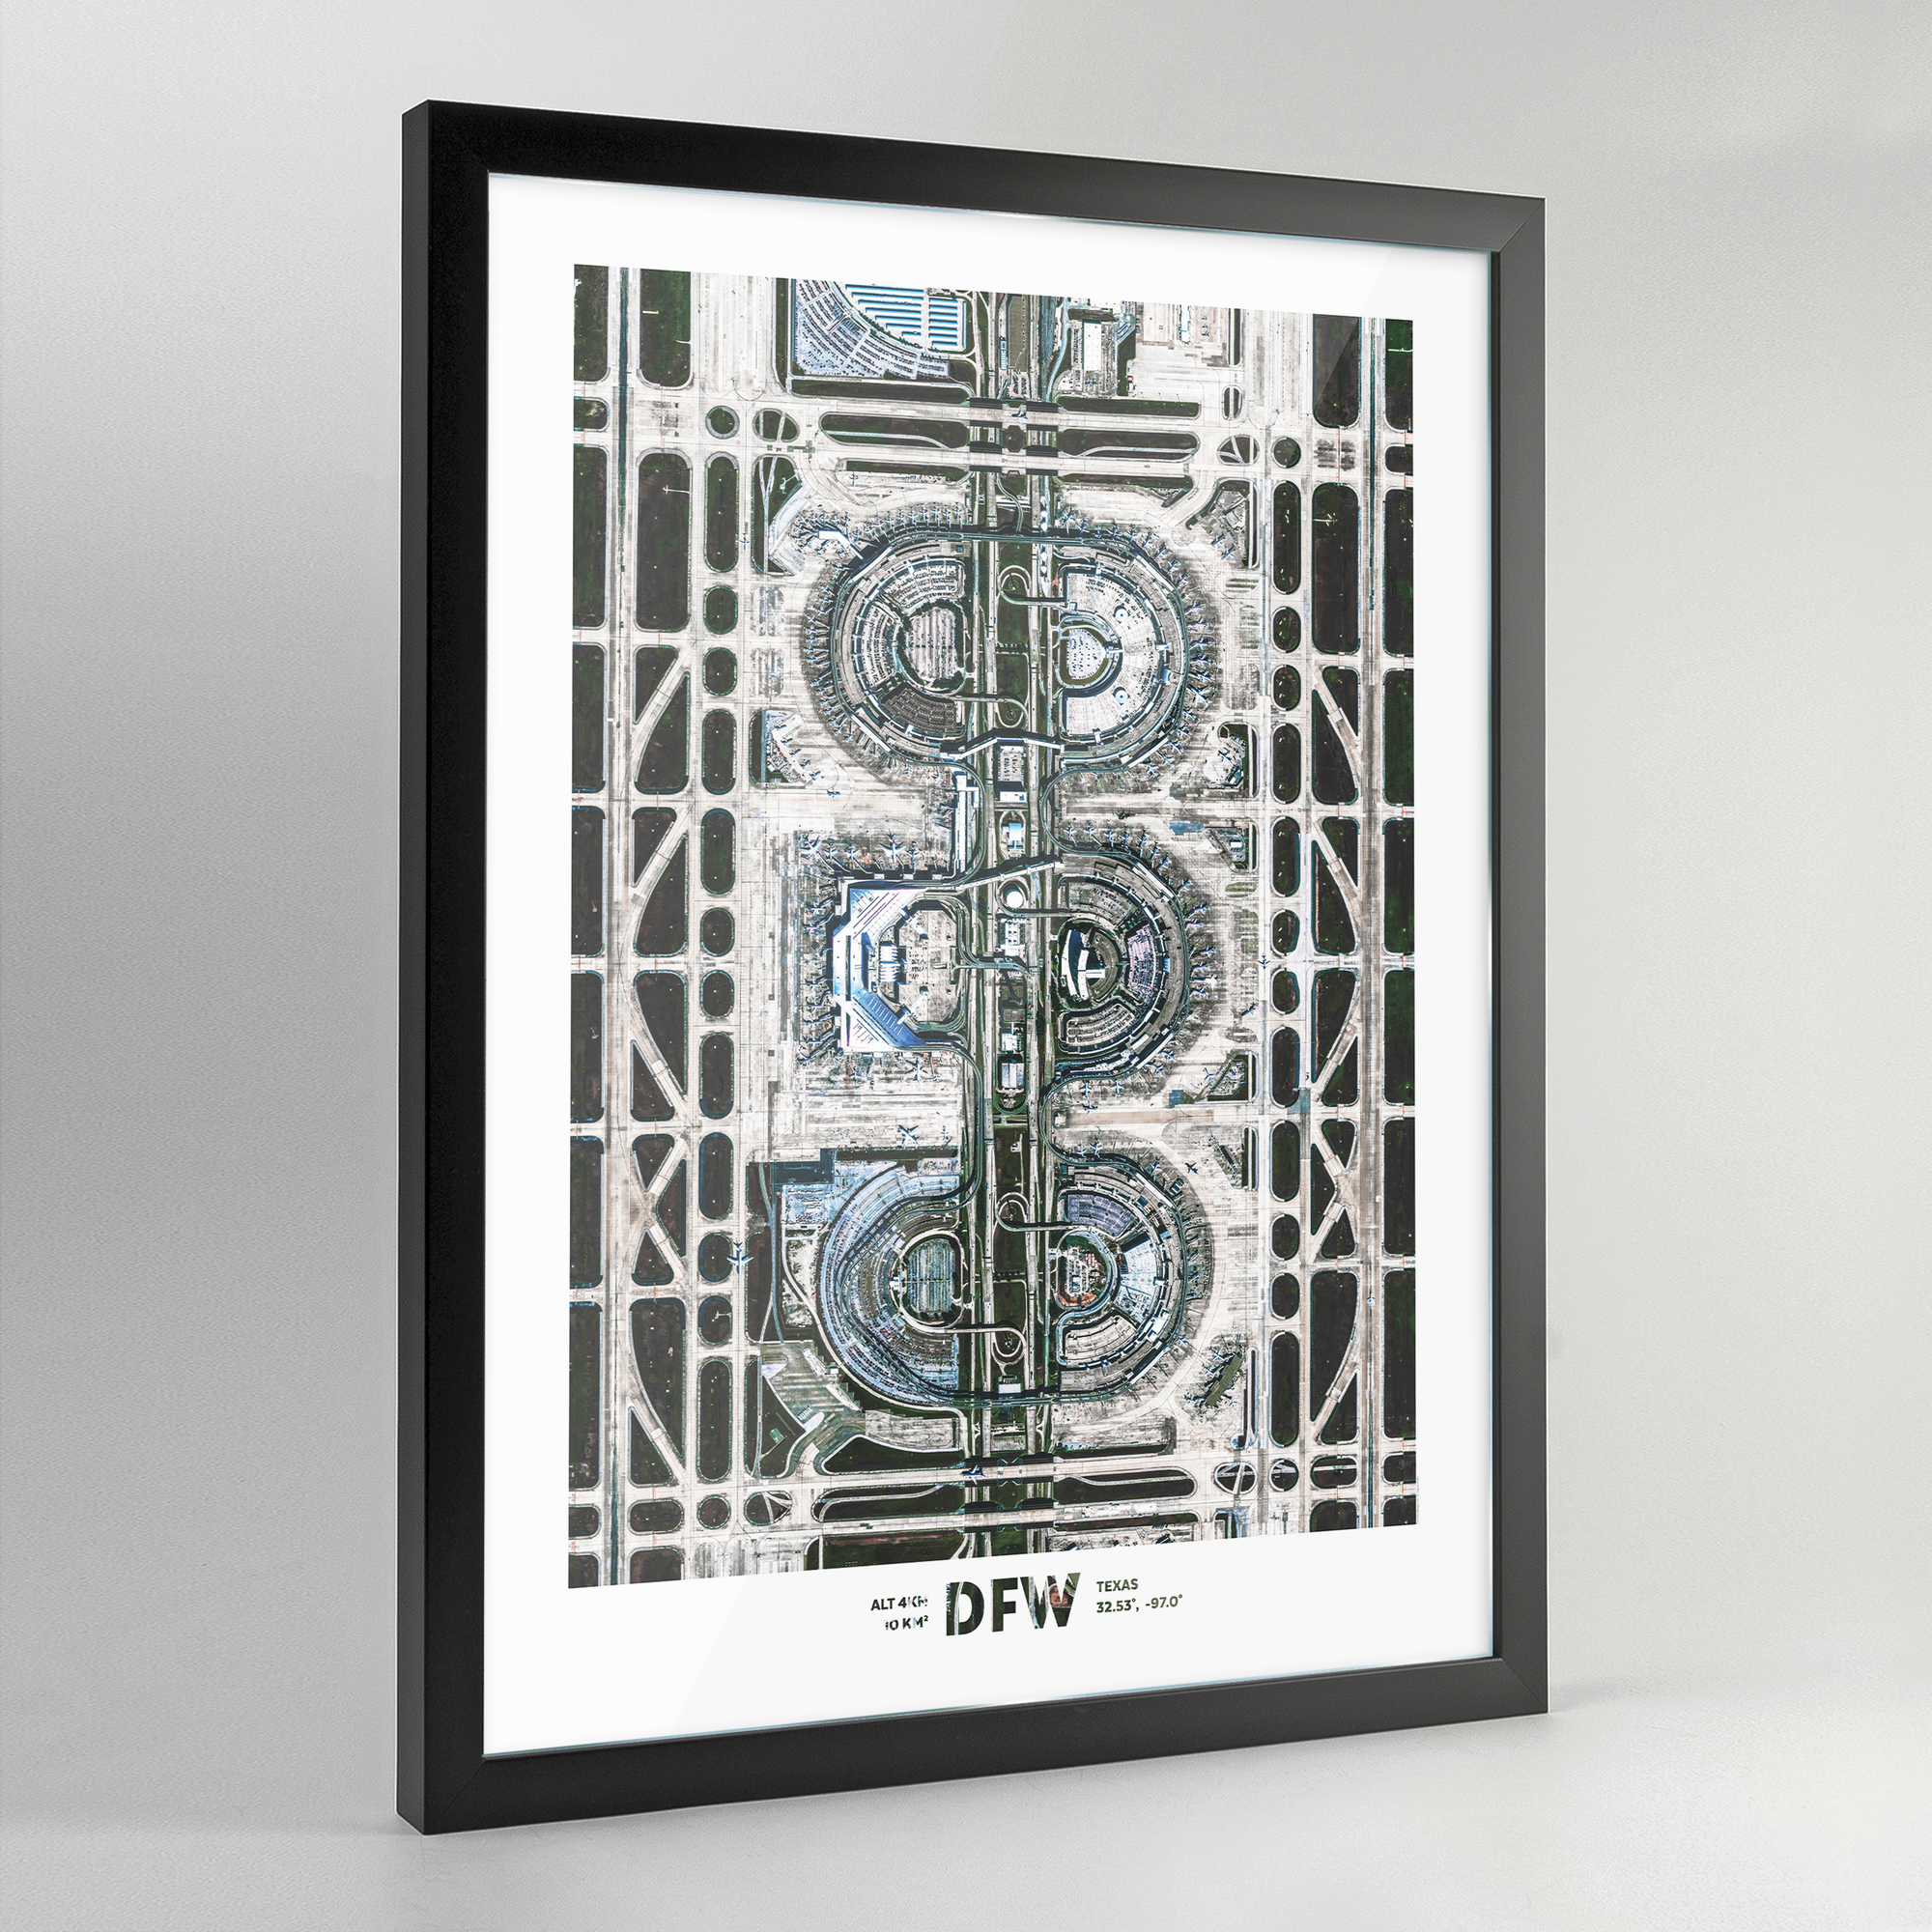 DFW Earth Photography - Art Print - Point Two Design